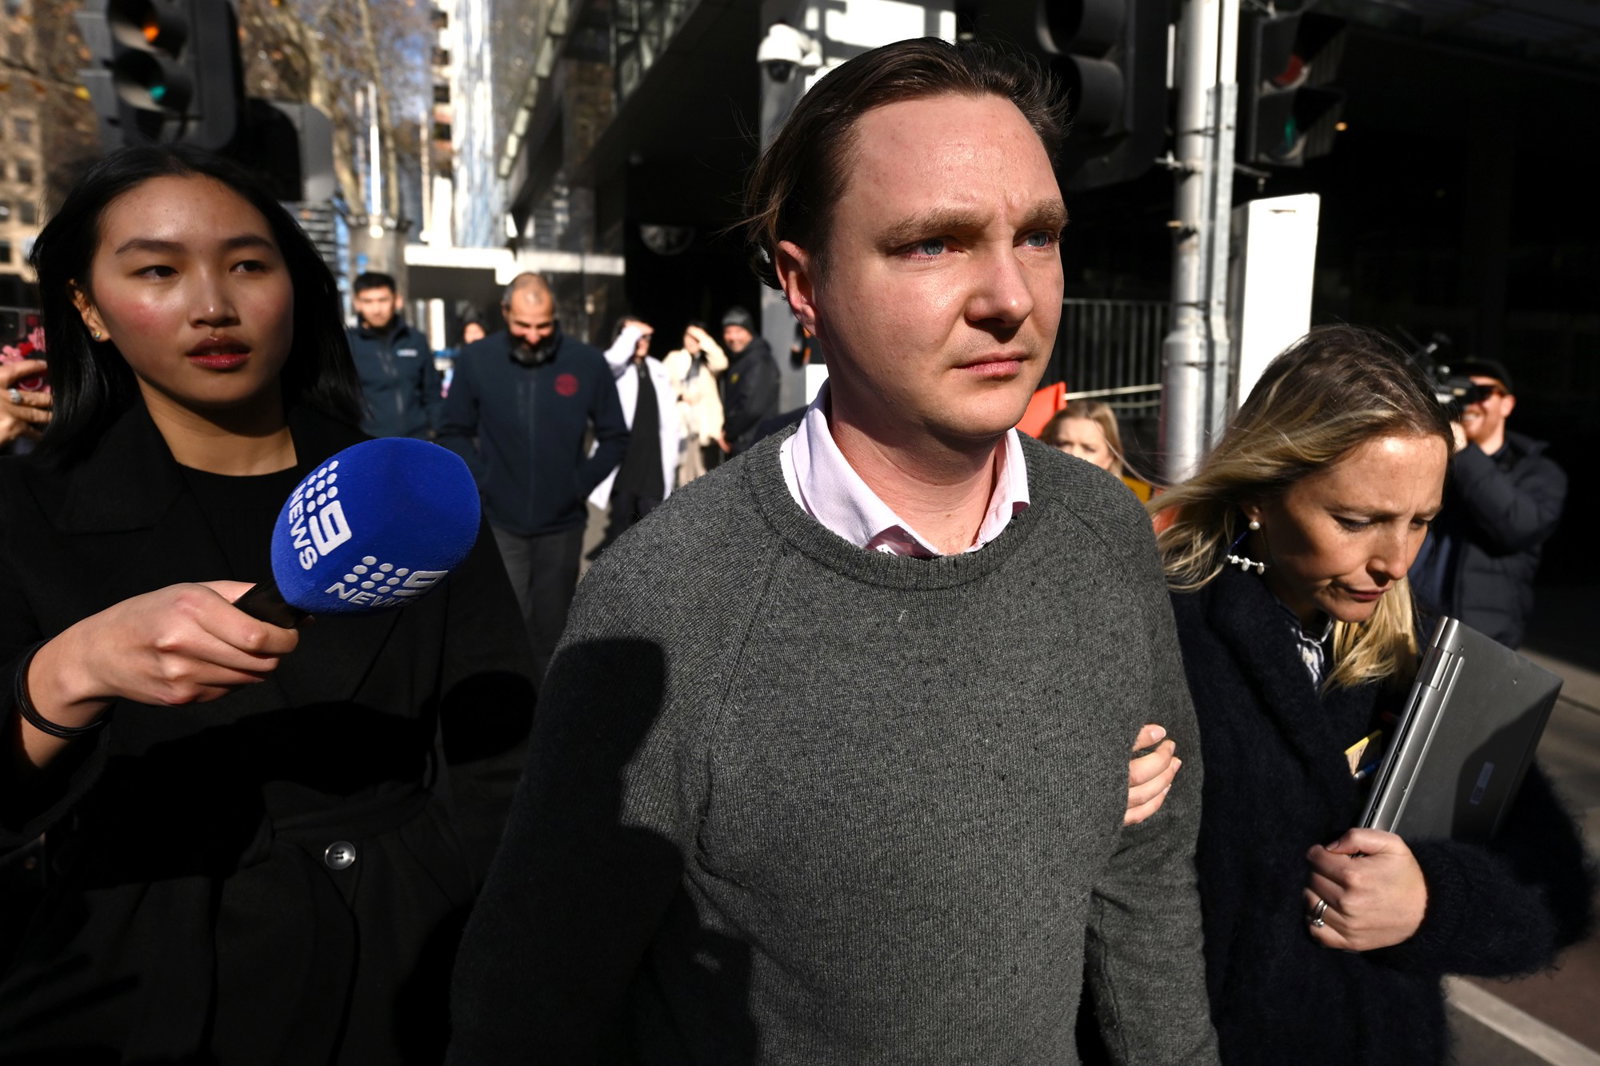 A man leaving court surrounded by media